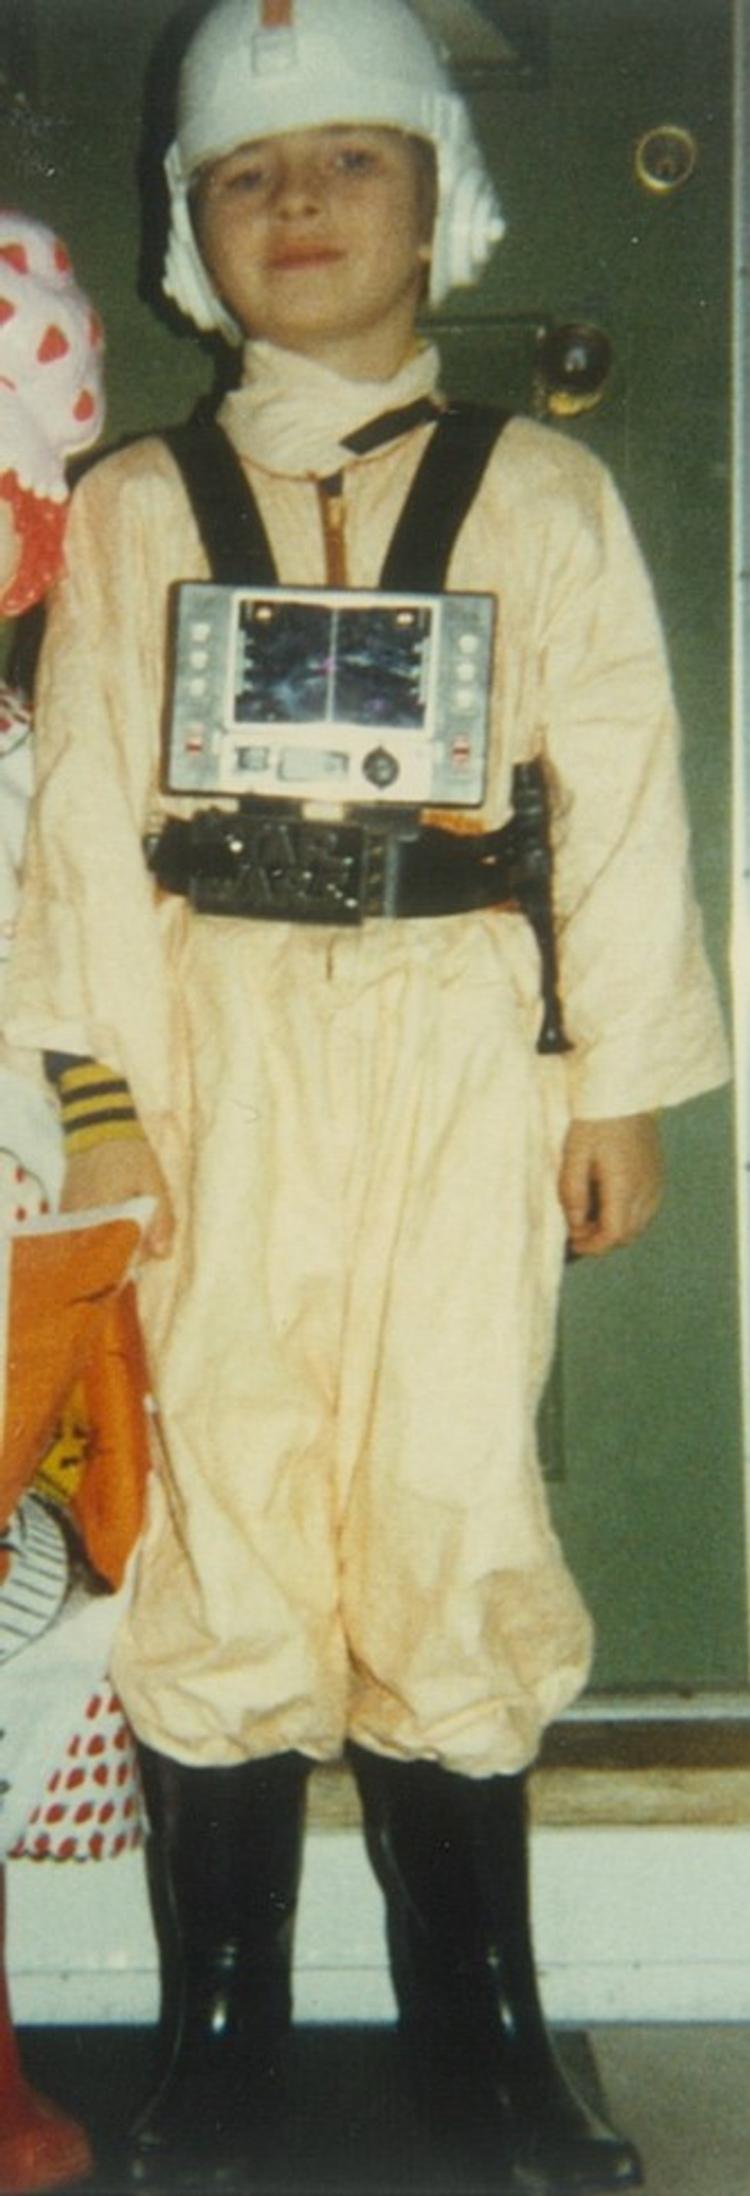 An early interest in space was on display when I chose for Halloween to be a rebel fighter pilot from Star Wars. Importantly my mother fashioned the uniform from a biohazard suit she "borrowed" from her lab and dyed orange.